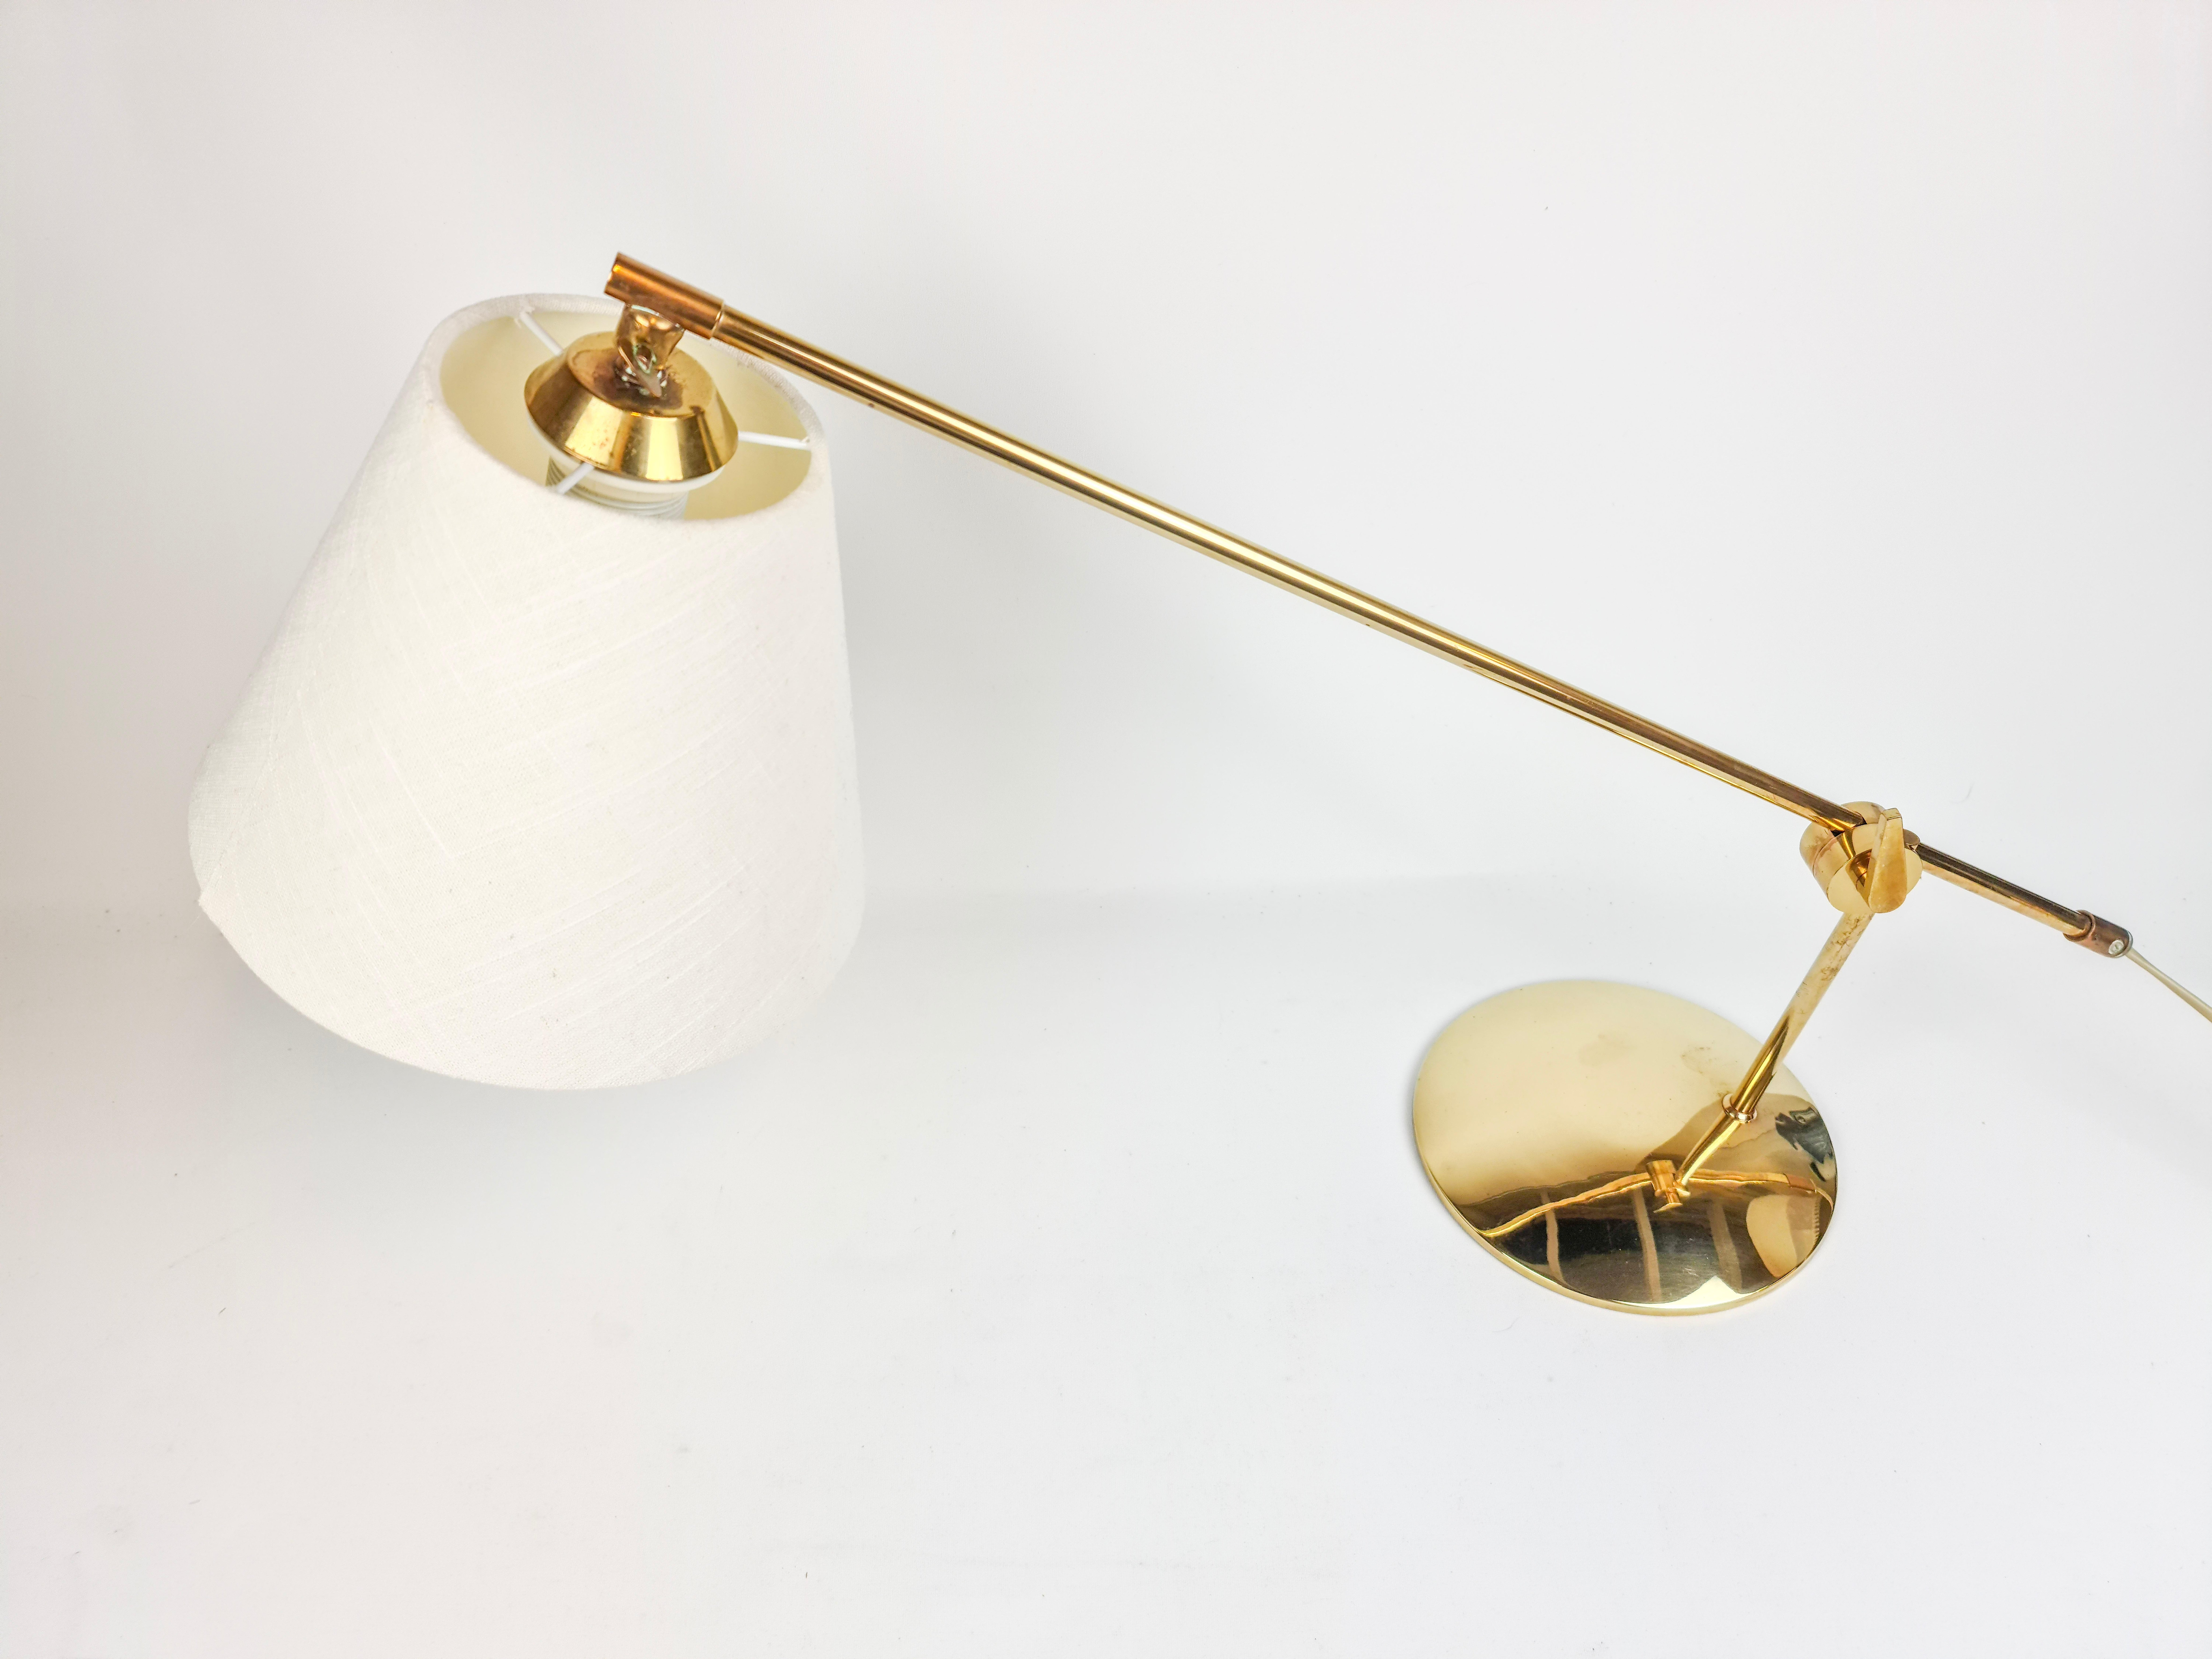 Danish Midcentury Table Lamp Attributed to Poul Dinesen, Denmark, 1960s